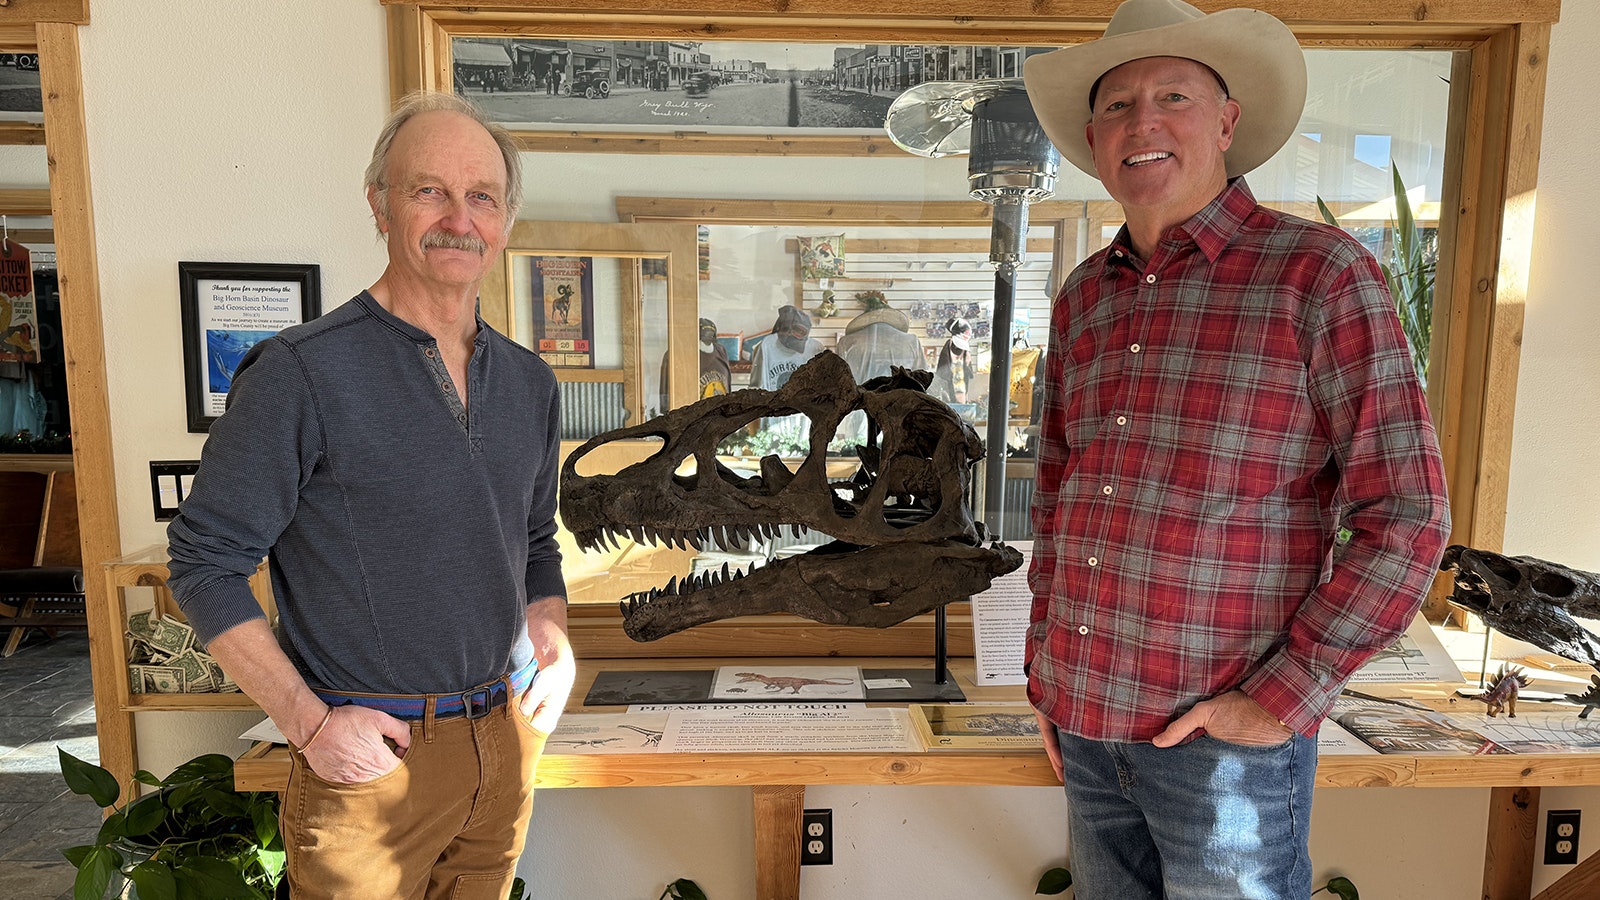 Eric Kvale and Nolan Oneal in the Big Horn Basin Dinosaur and Geoscience Museum. The partnership of the Geoscience Museum and Greybull Museum seeks to build a new building that could become a world-class museum chronicling the paleontological and archaeological history of Greybull.